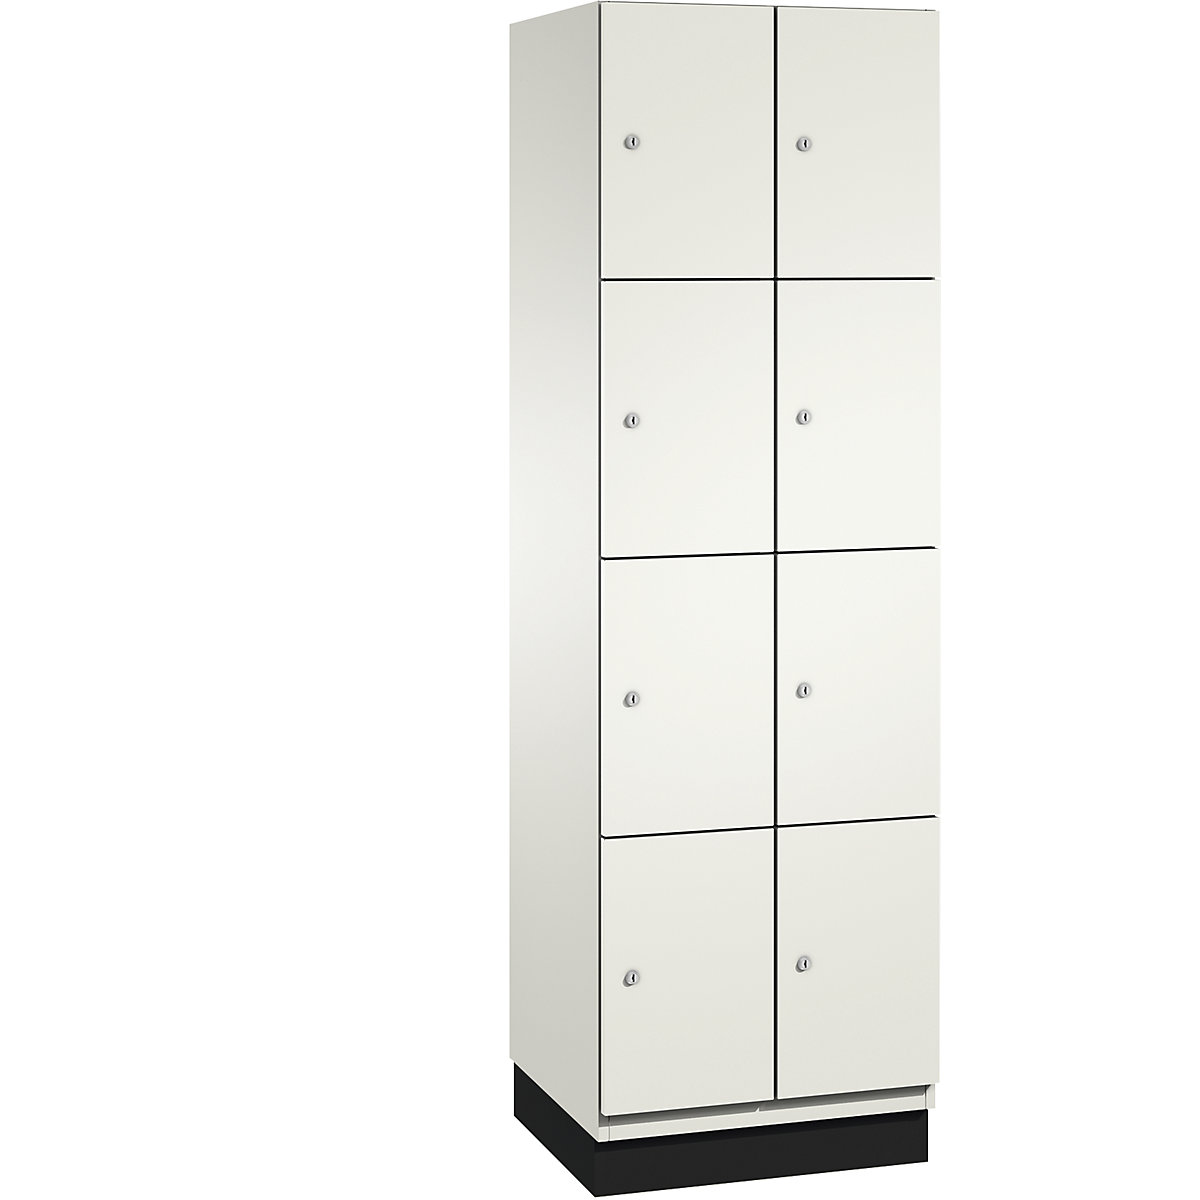 CAMBIO compartment locker with sheet steel doors – C+P, 8 compartments, width 600 mm, body pure white / door pure white-10